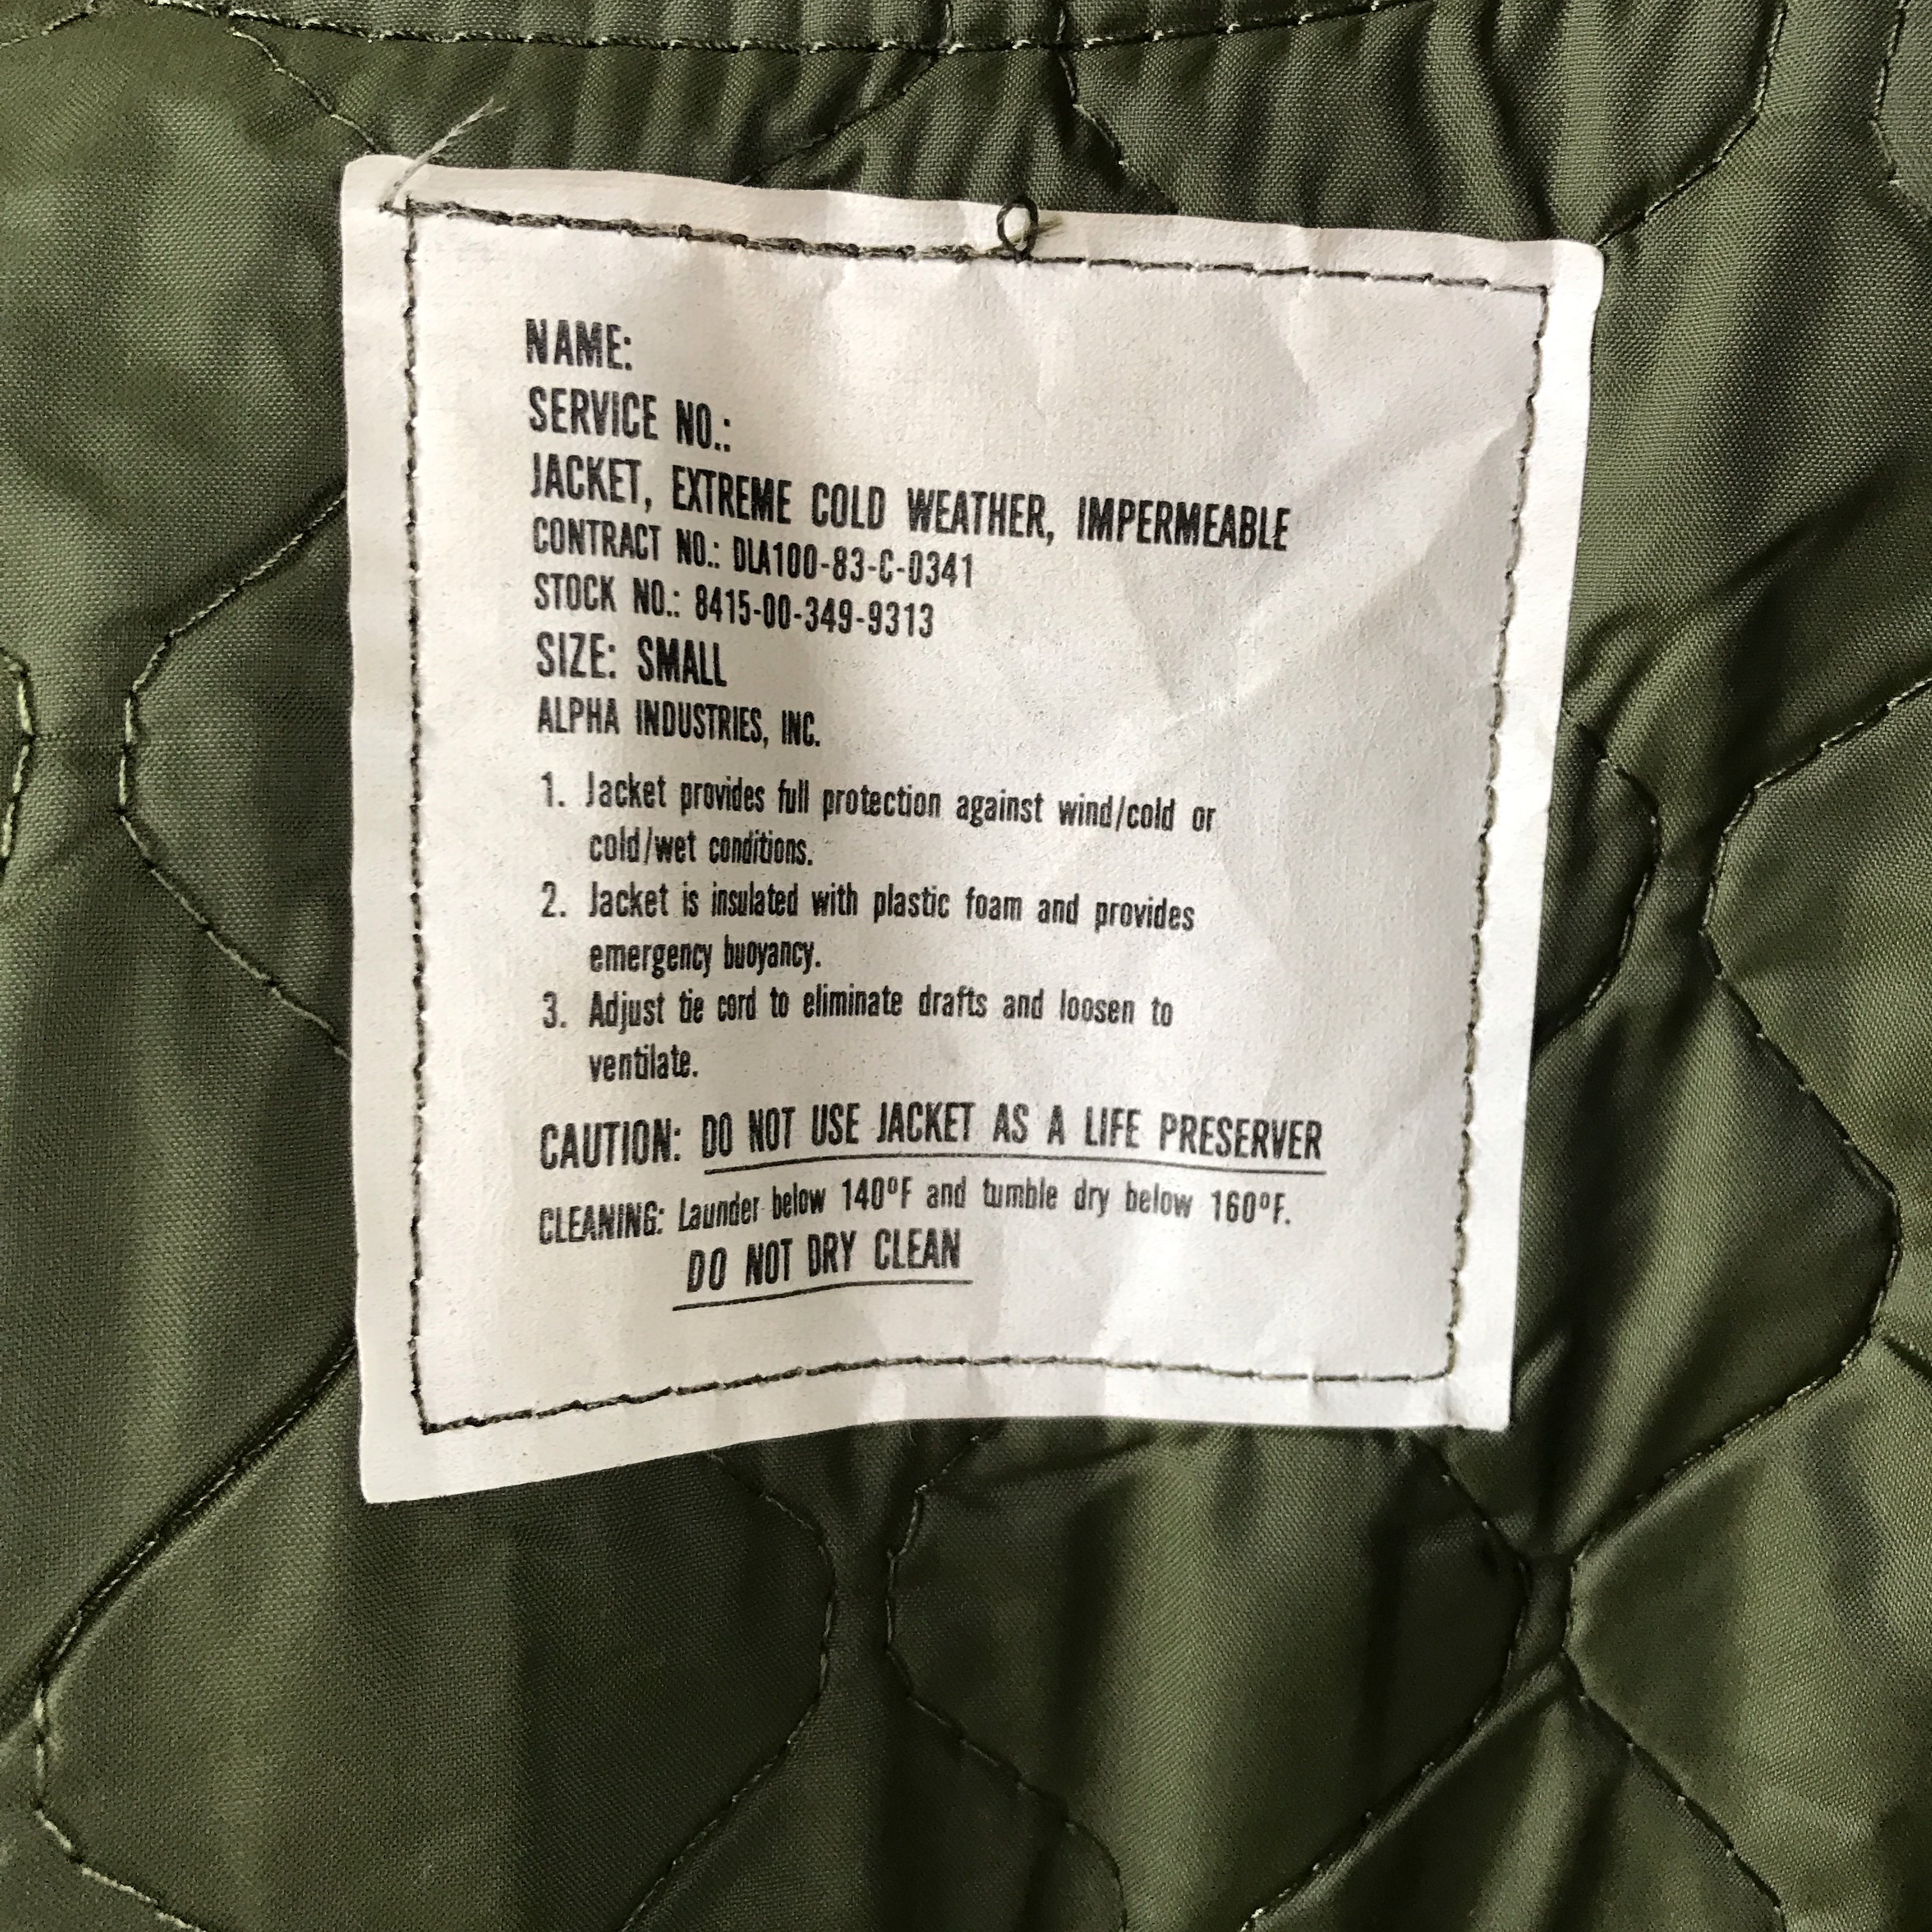 [ ONLY ONE ! ] U.S.NAVY EXTREME COLD WEATHER DECK JACKET / U.S MILITARY